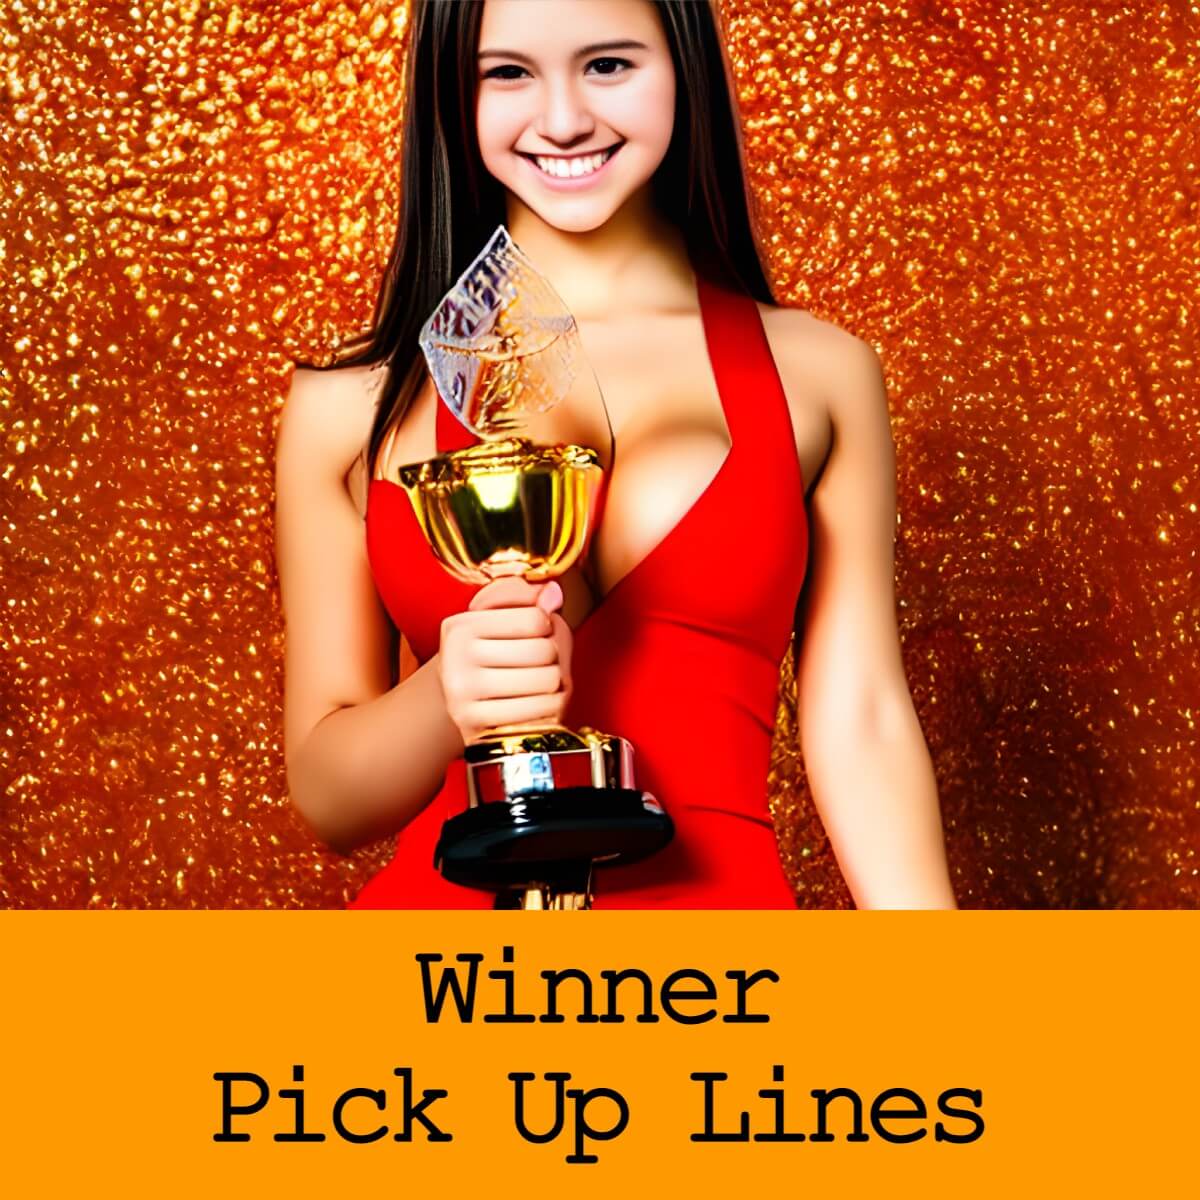 Pick Up Lines About Winners